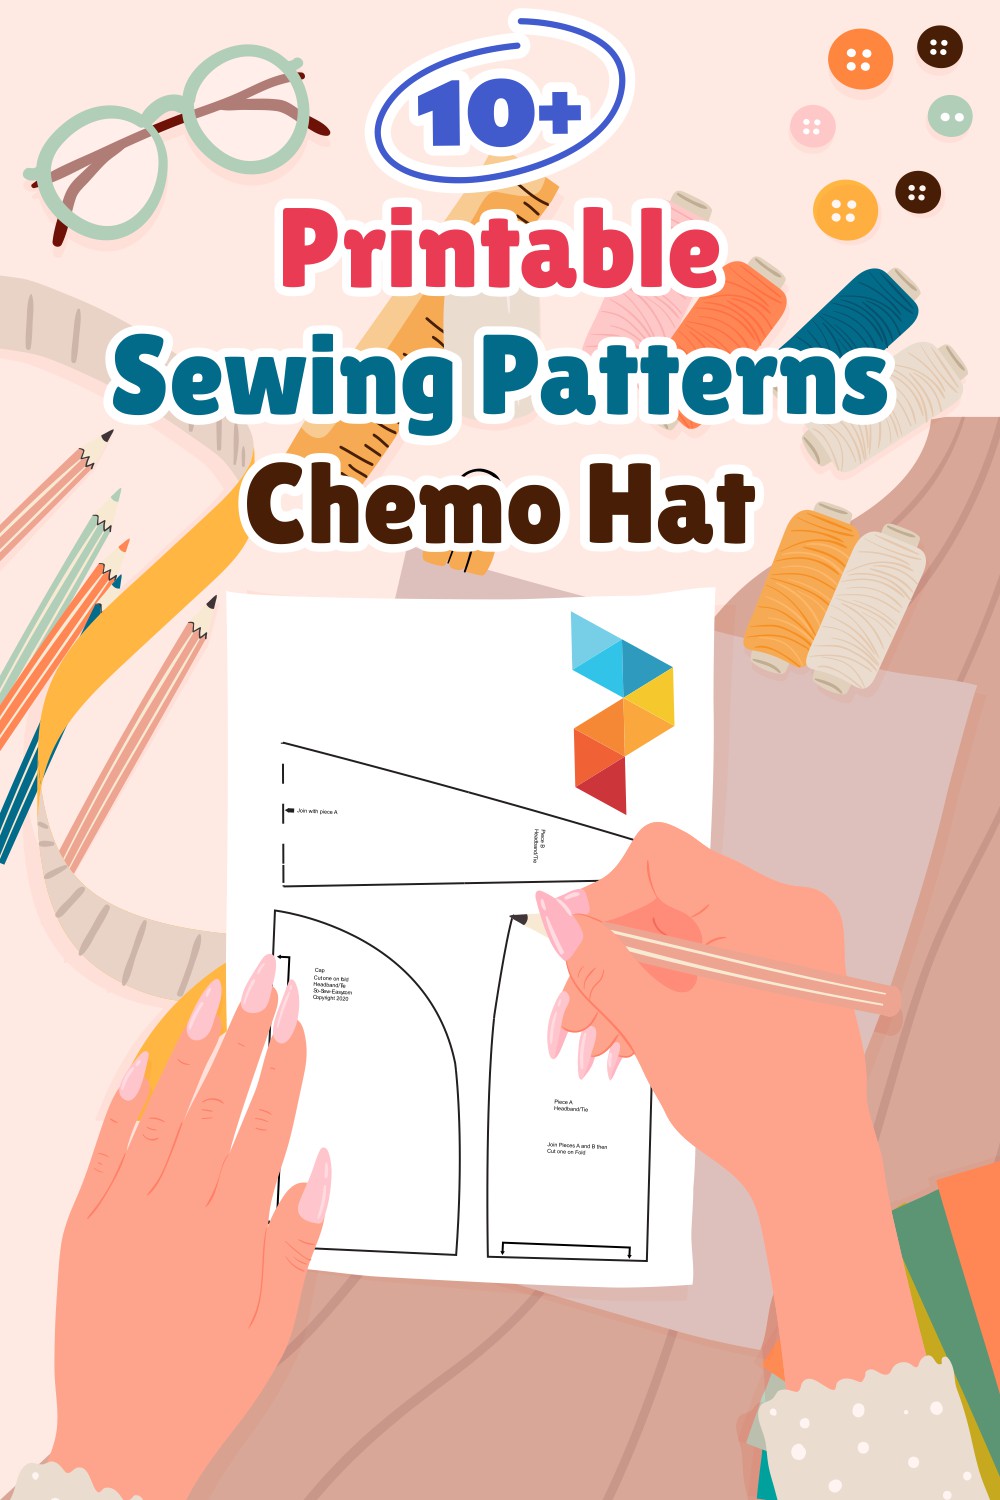 Sewing Patterns Chemo Hat